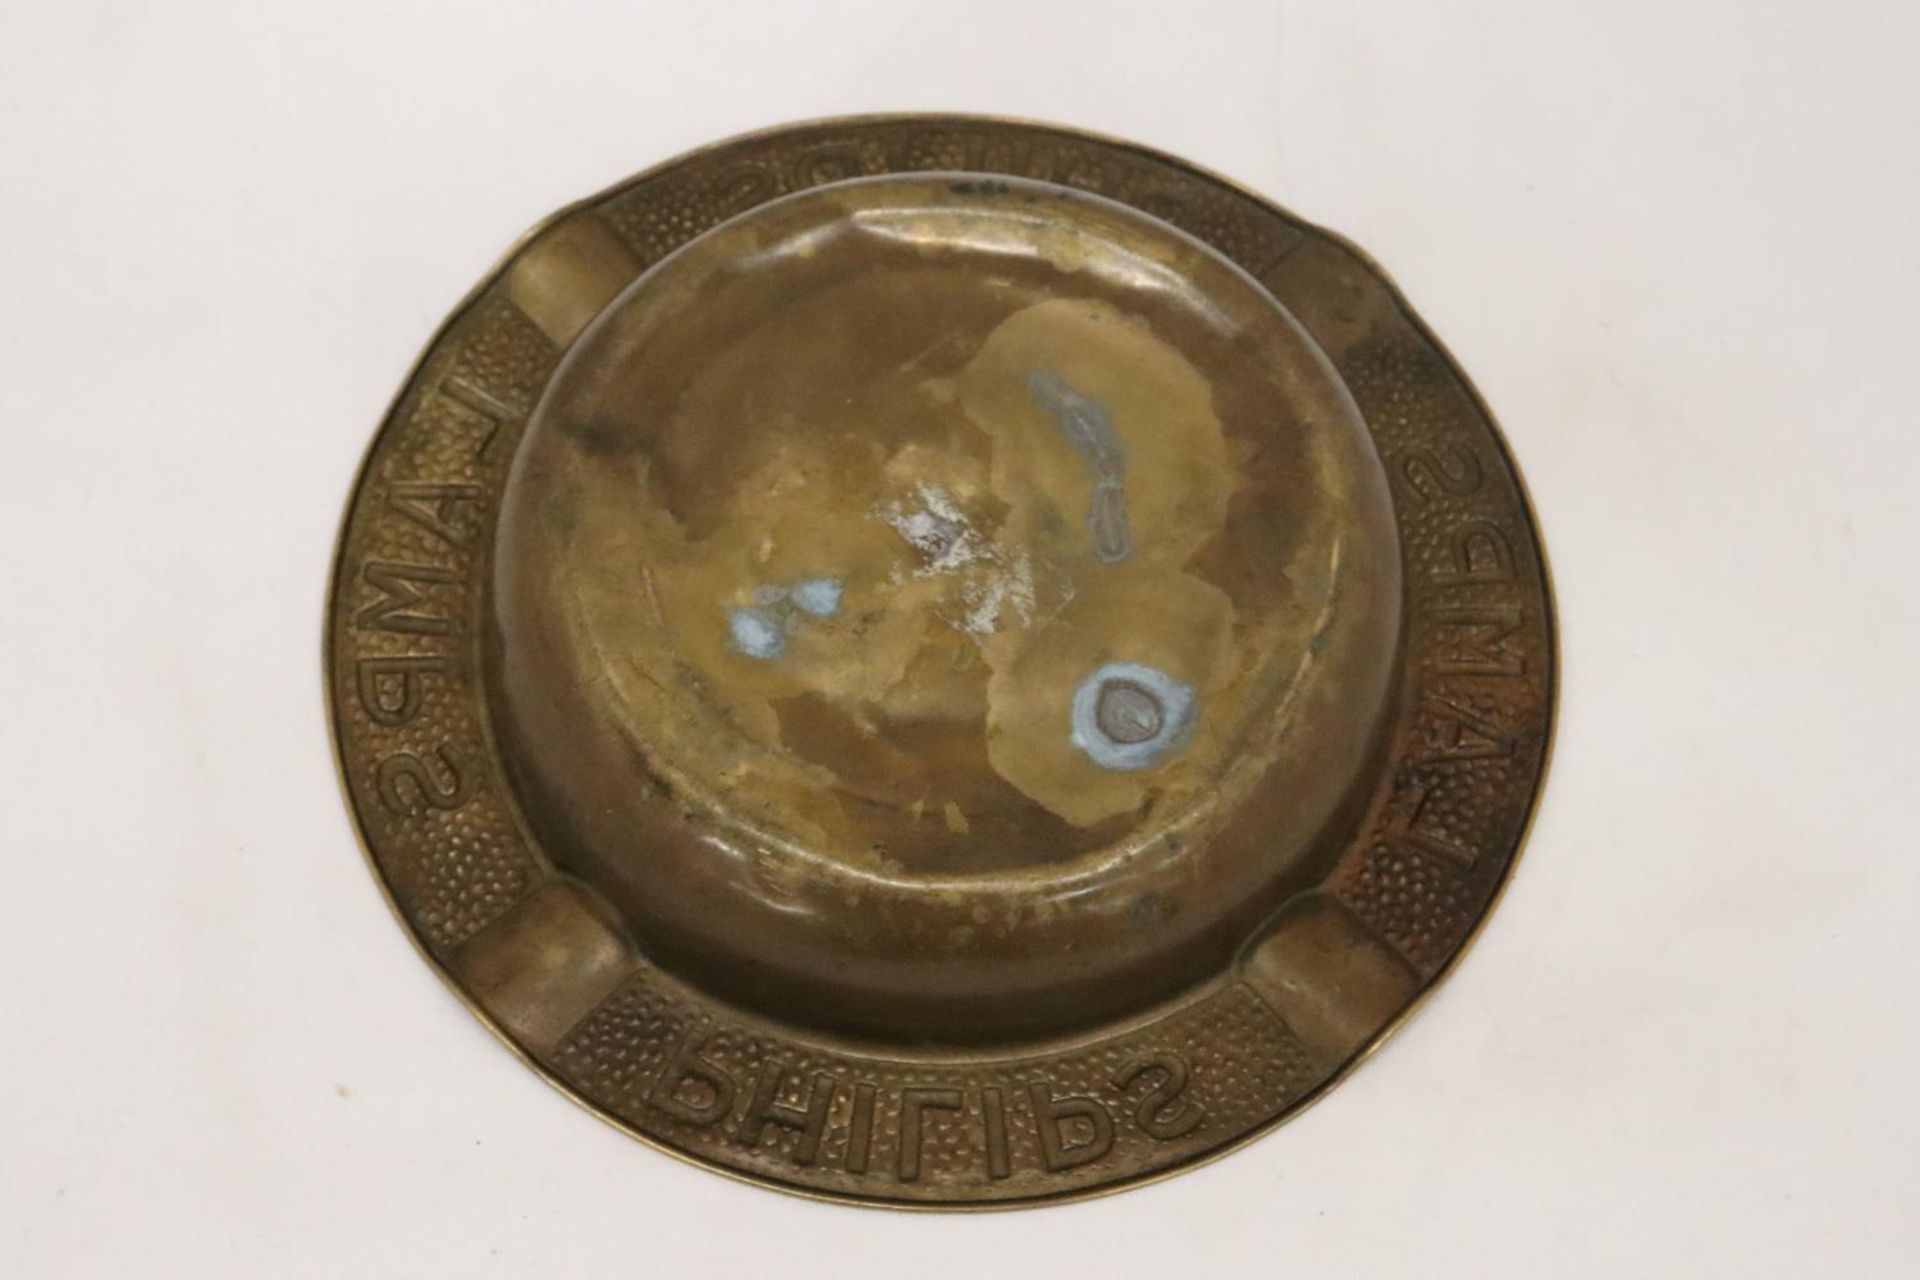 A LARGE 1930'S BRASS ADVERTISING ASHTRAY PHILIPS LAMPS - Image 3 of 3